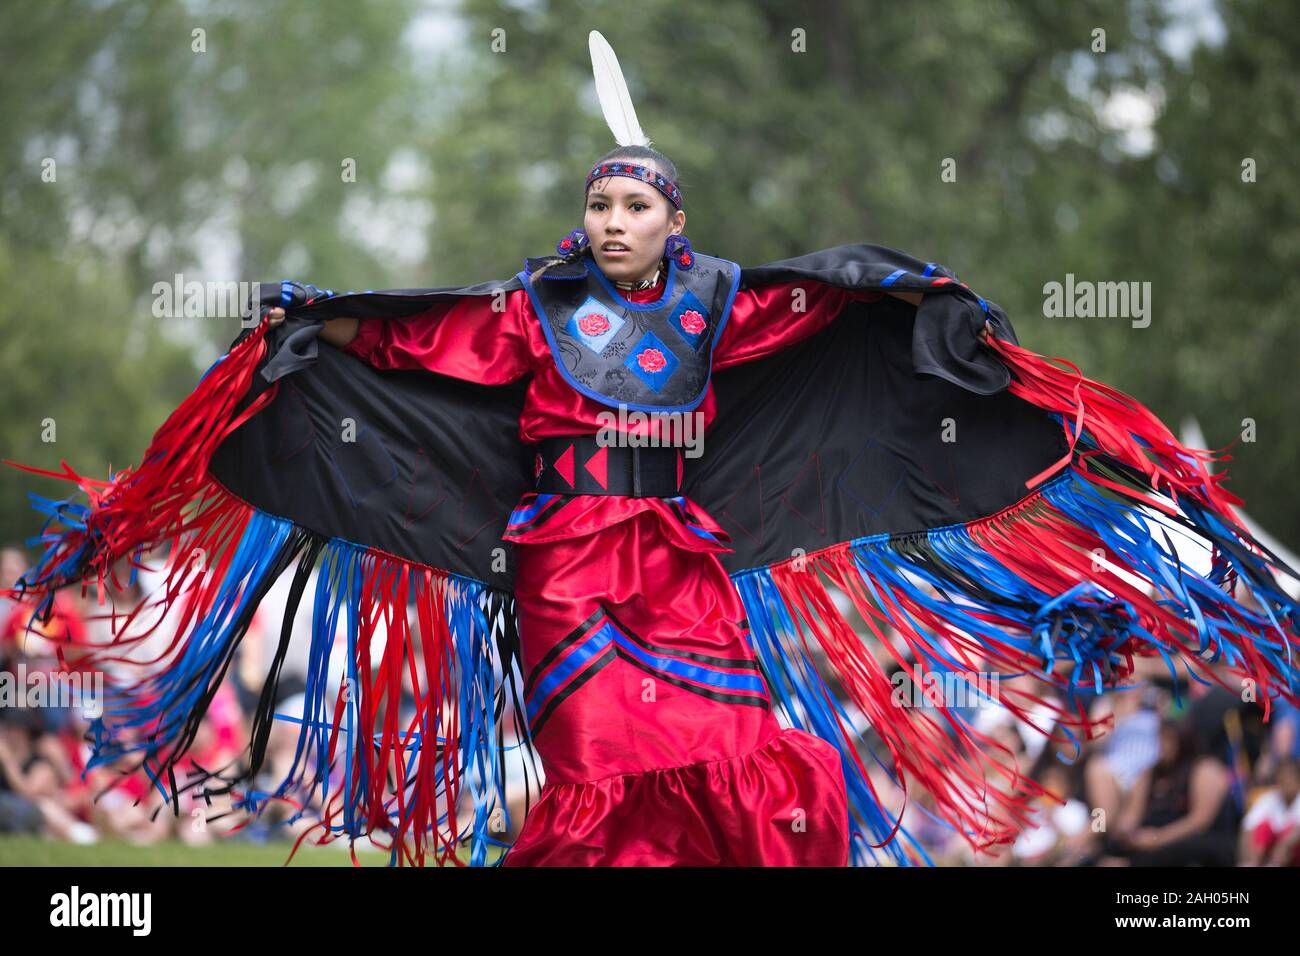 Female indigenous dancer at Canada Day powwow. Stock Photo